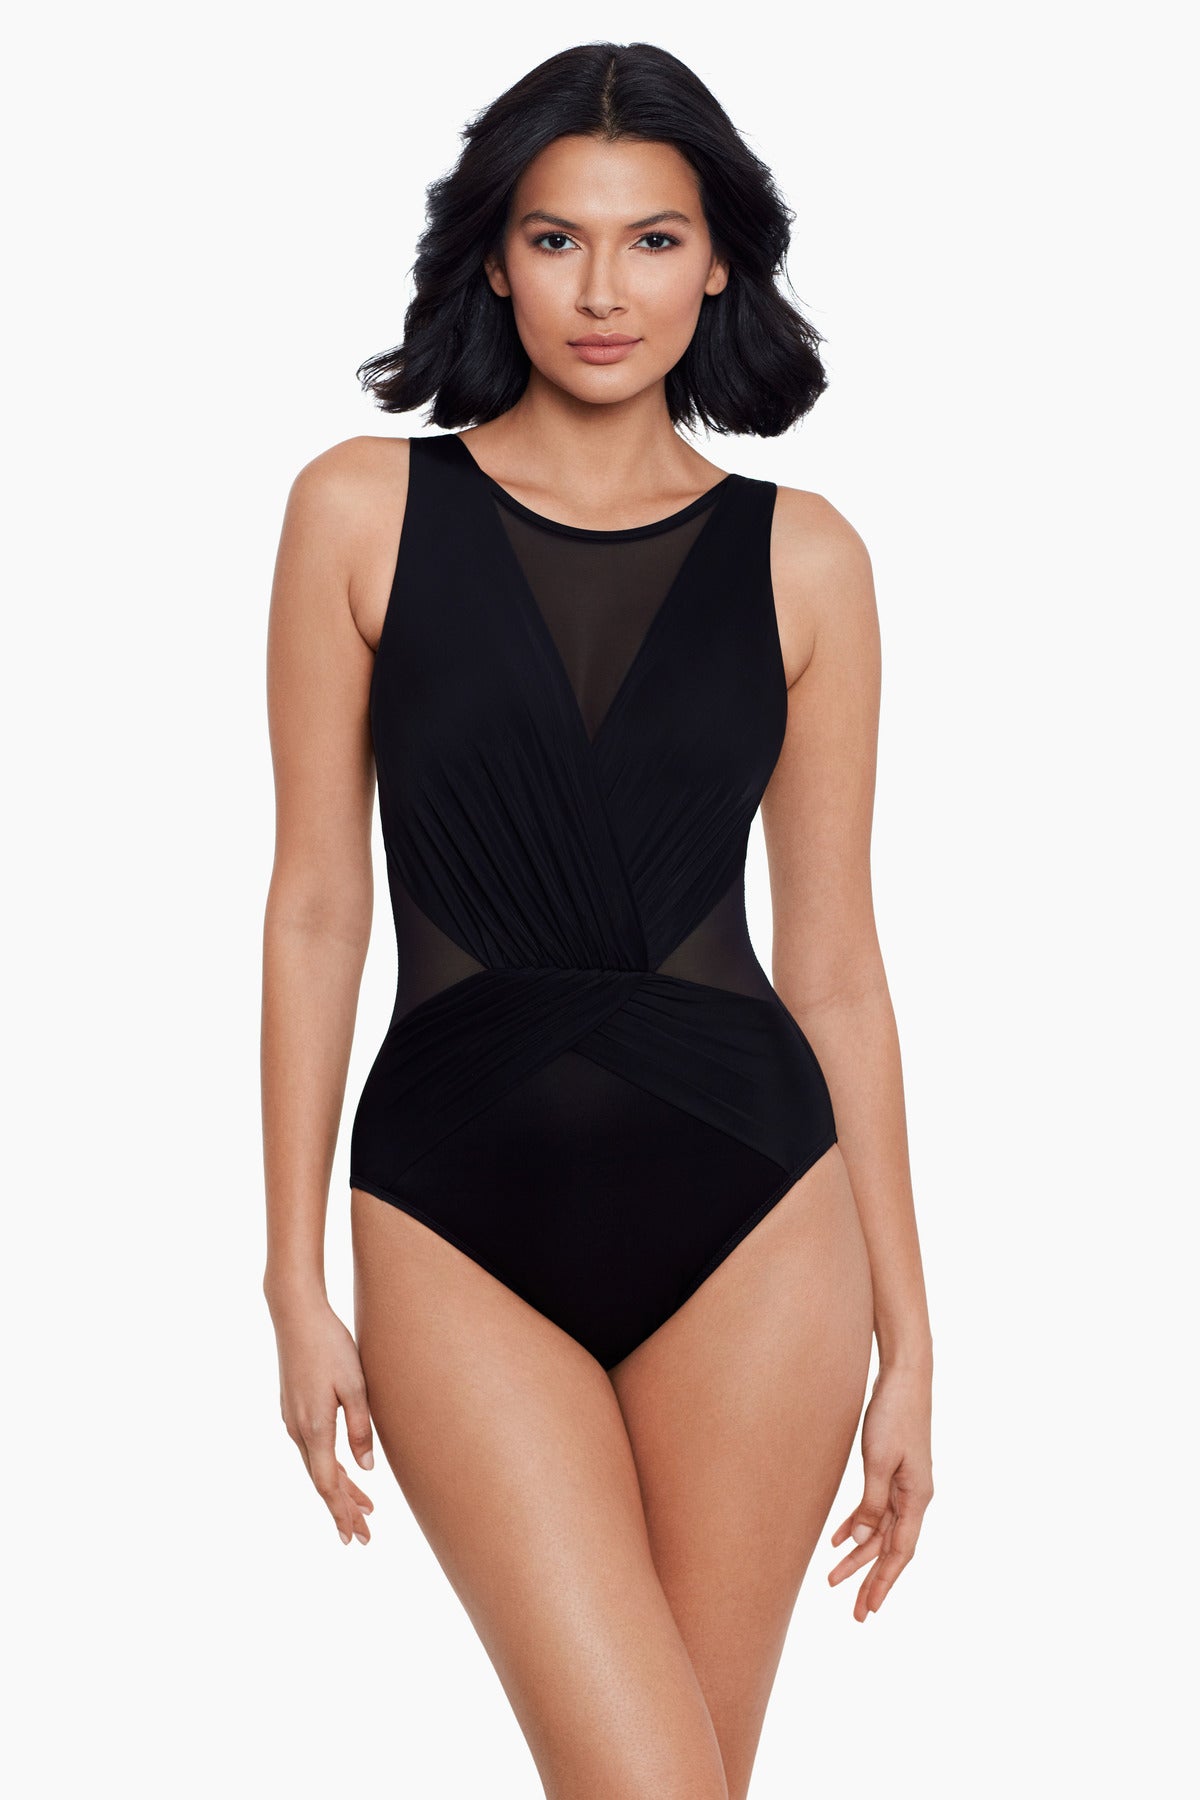 Illusionisis Palma One Piece Swimsuit DD-Cup